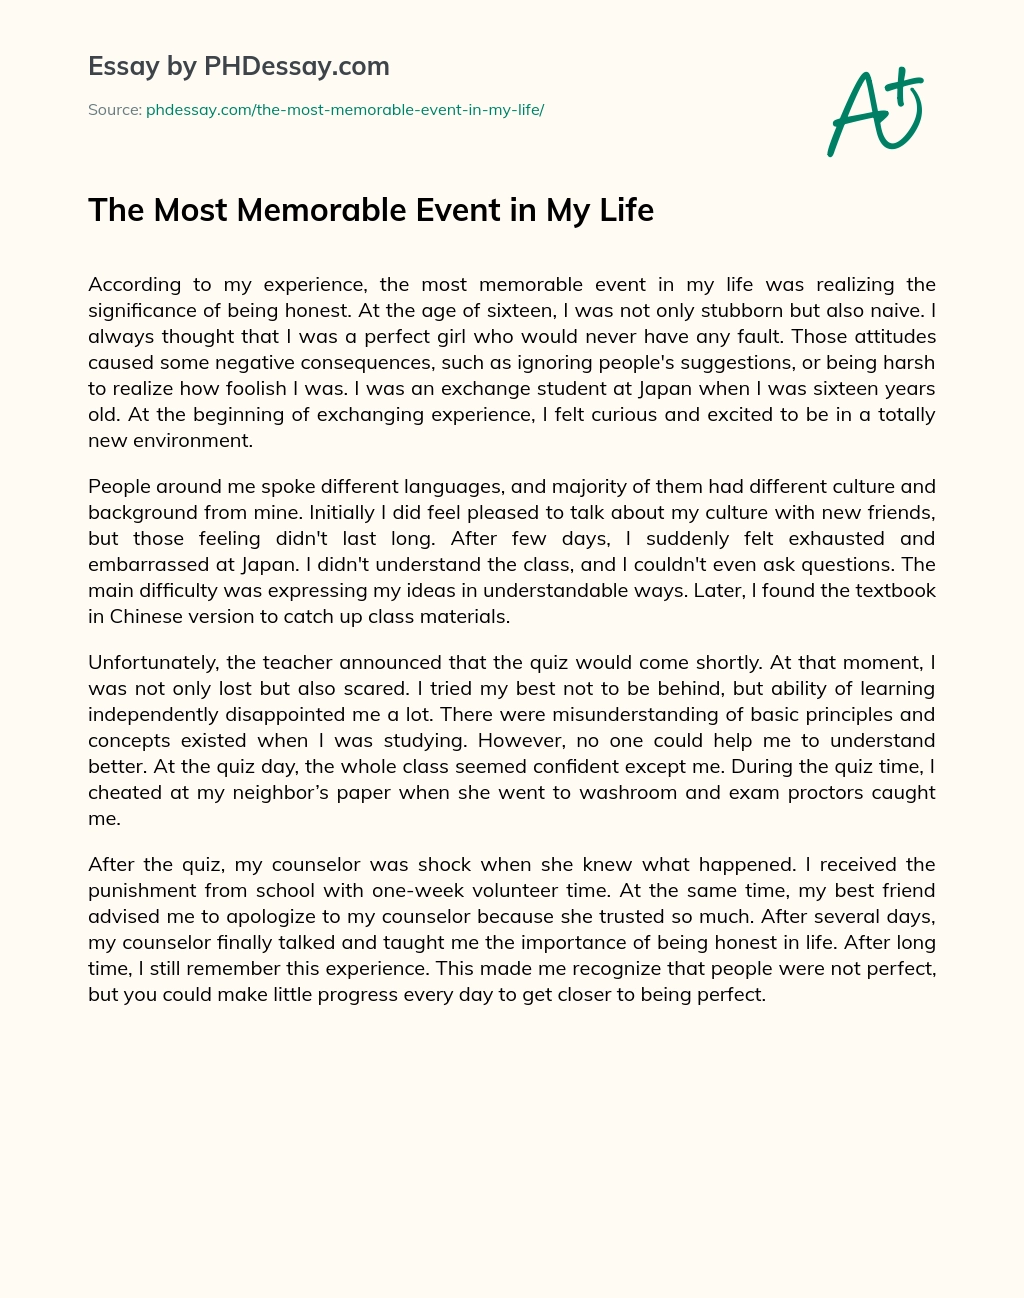 The Most Memorable Event in My Life essay